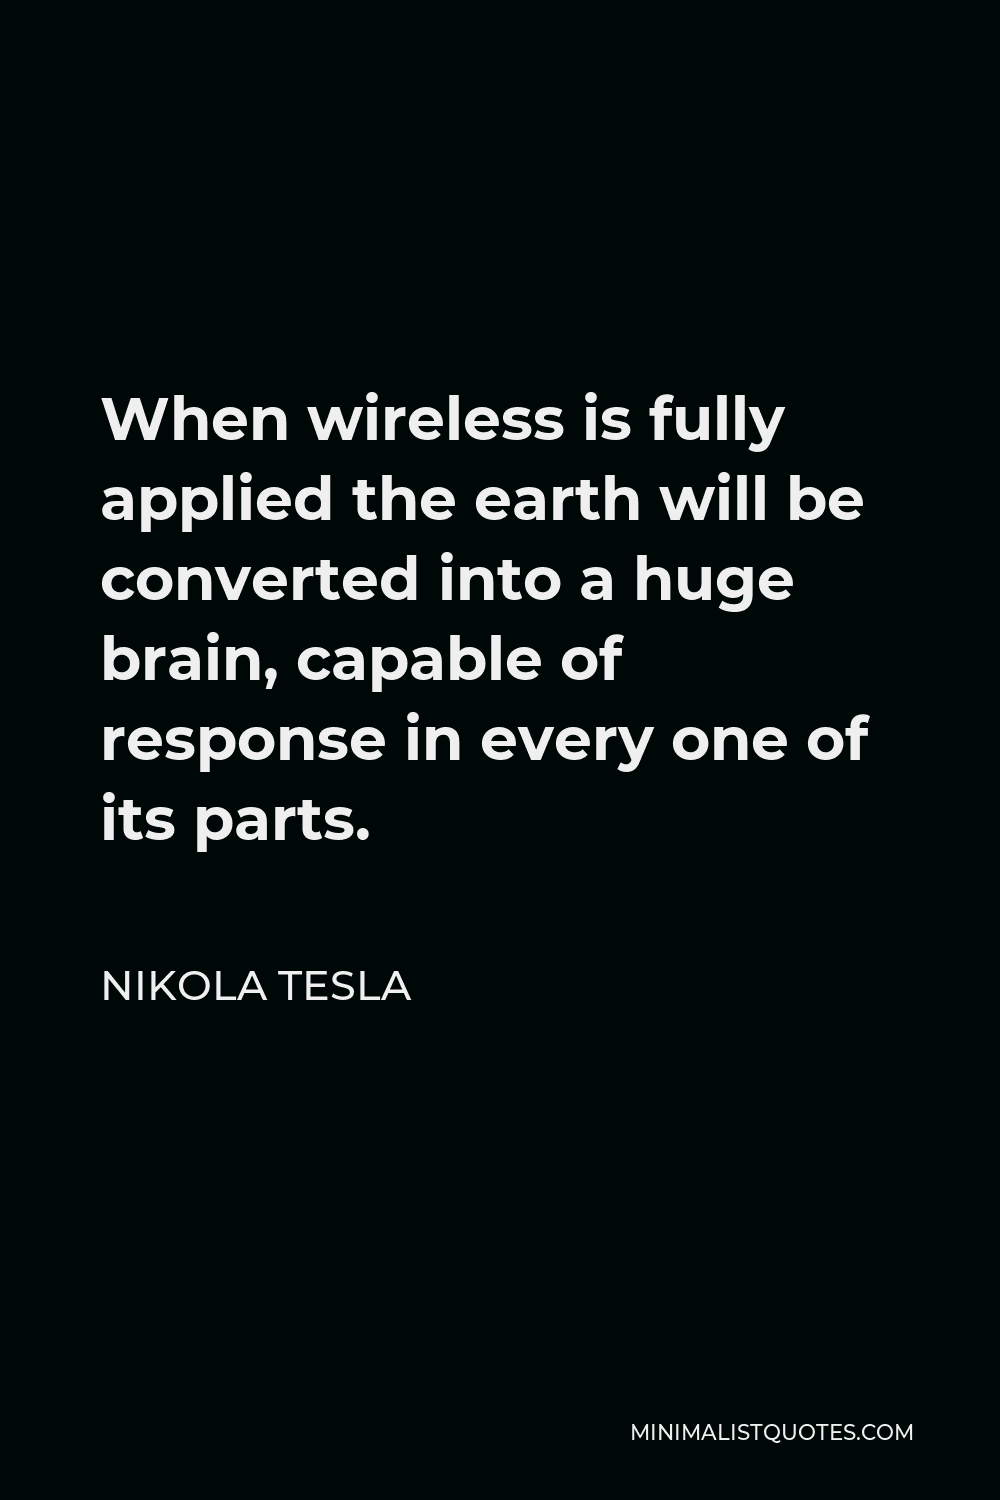 Nikola Tesla Quote - When wireless is fully applied the earth will be converted into a huge brain, capable of response in every one of its parts.